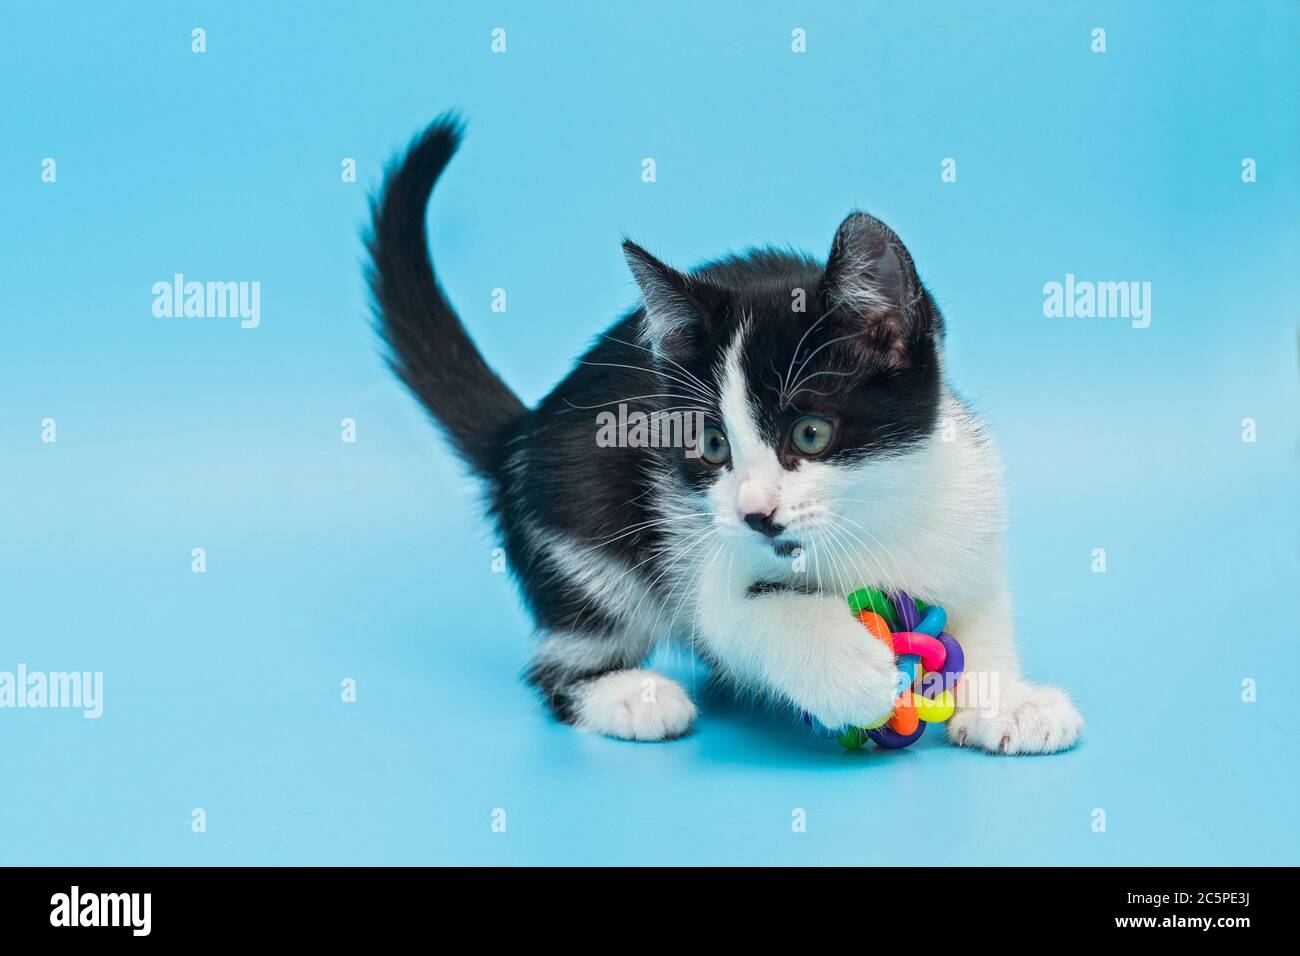 Small, playful kitten plays with a bright ball on a blue background Stock Photo